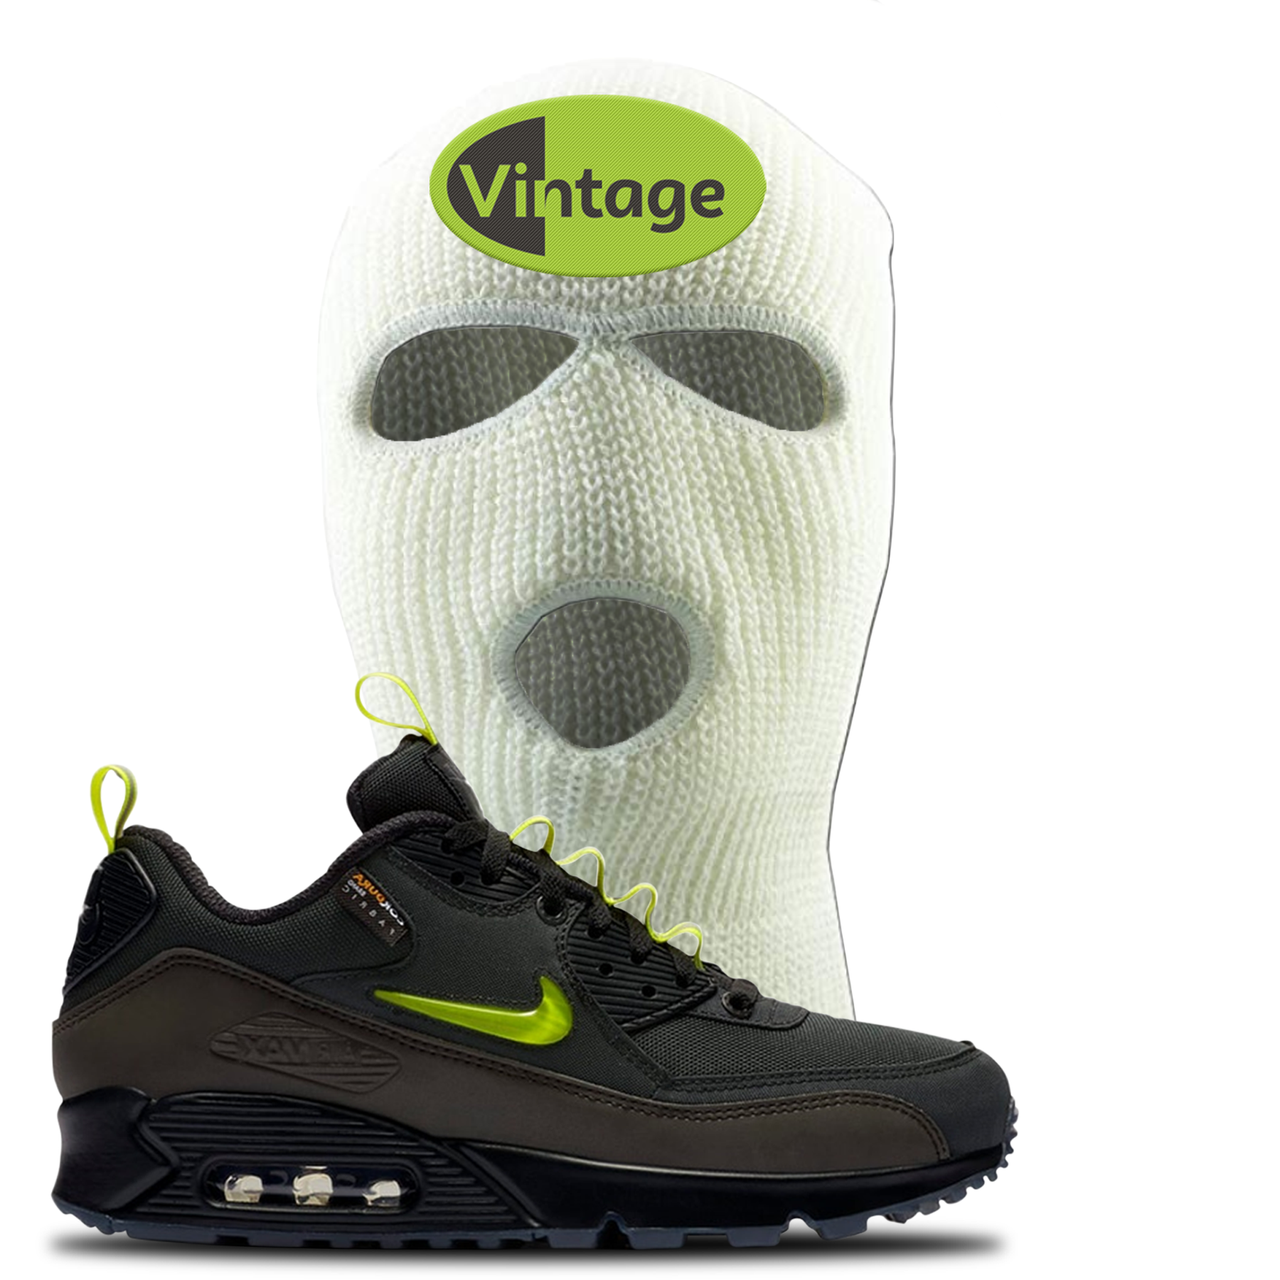 The Basement X Air Max 90 Manchester Vintage Oval White Sneaker Hook Up Ski Mask